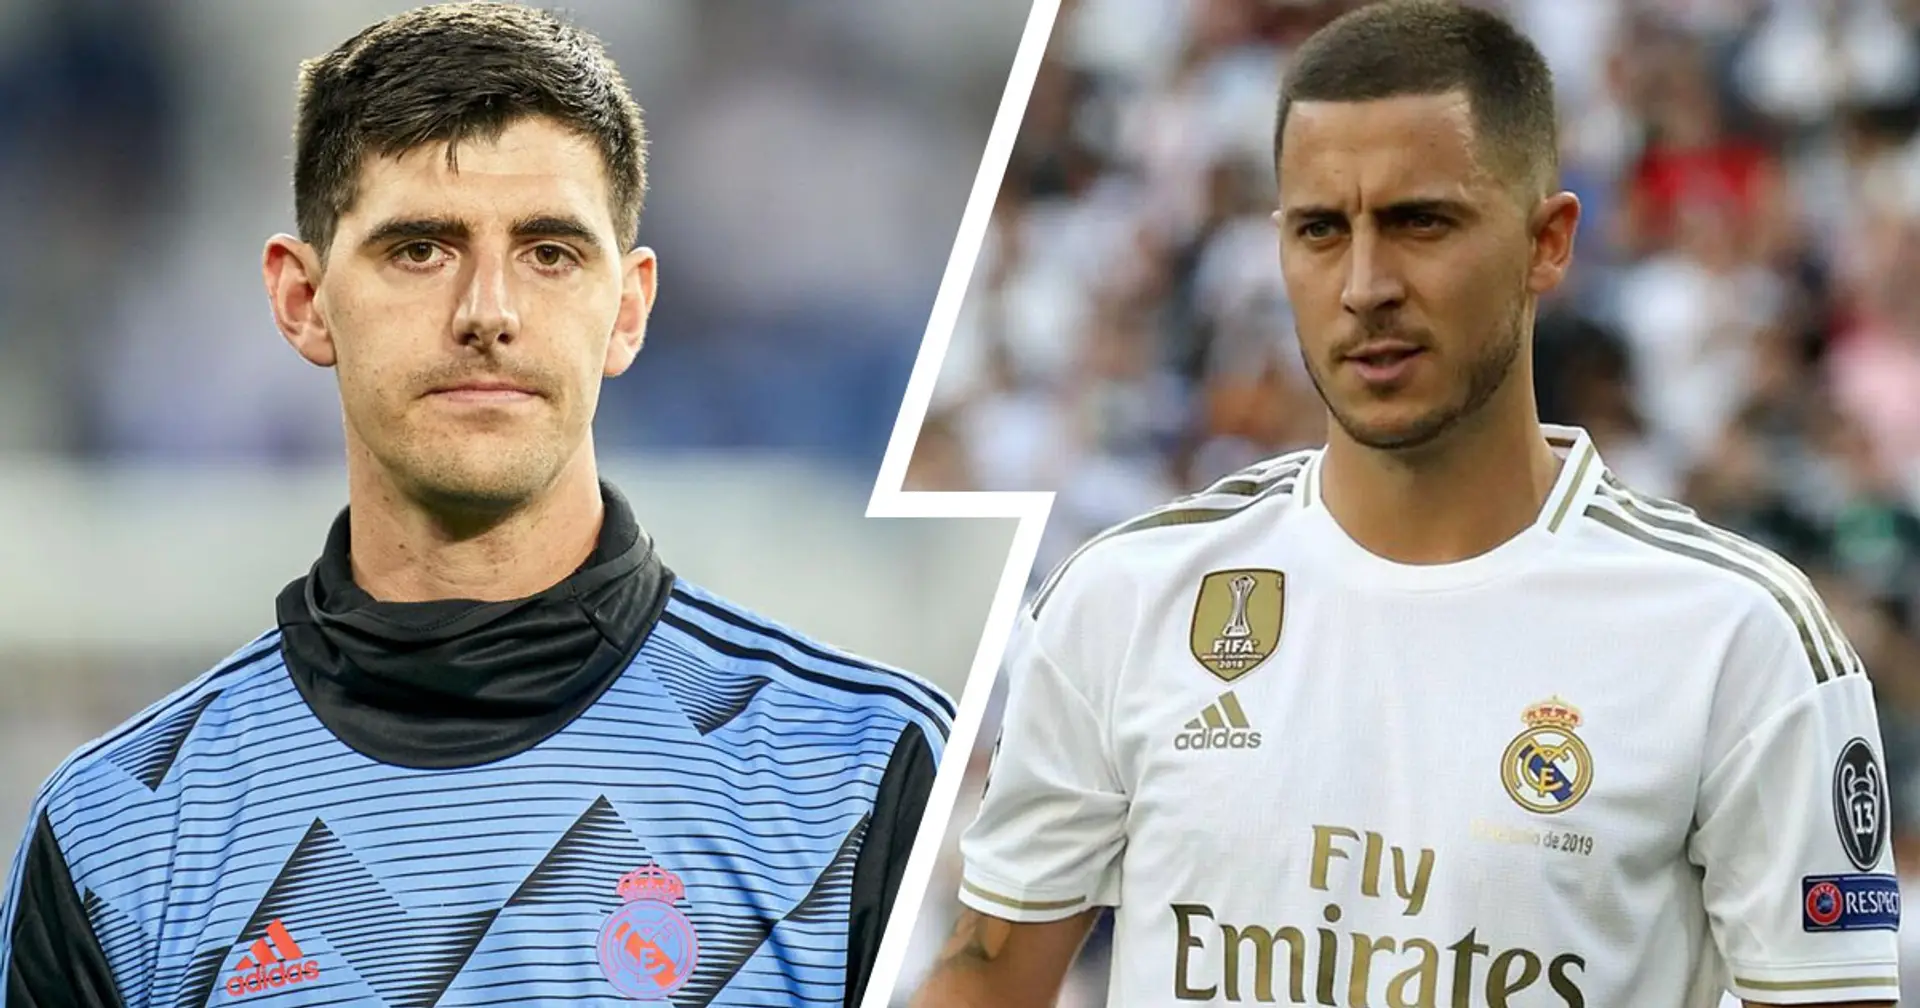 Madrid pair Hazard and Courtois selected by Belgium for UEFA Nations League games